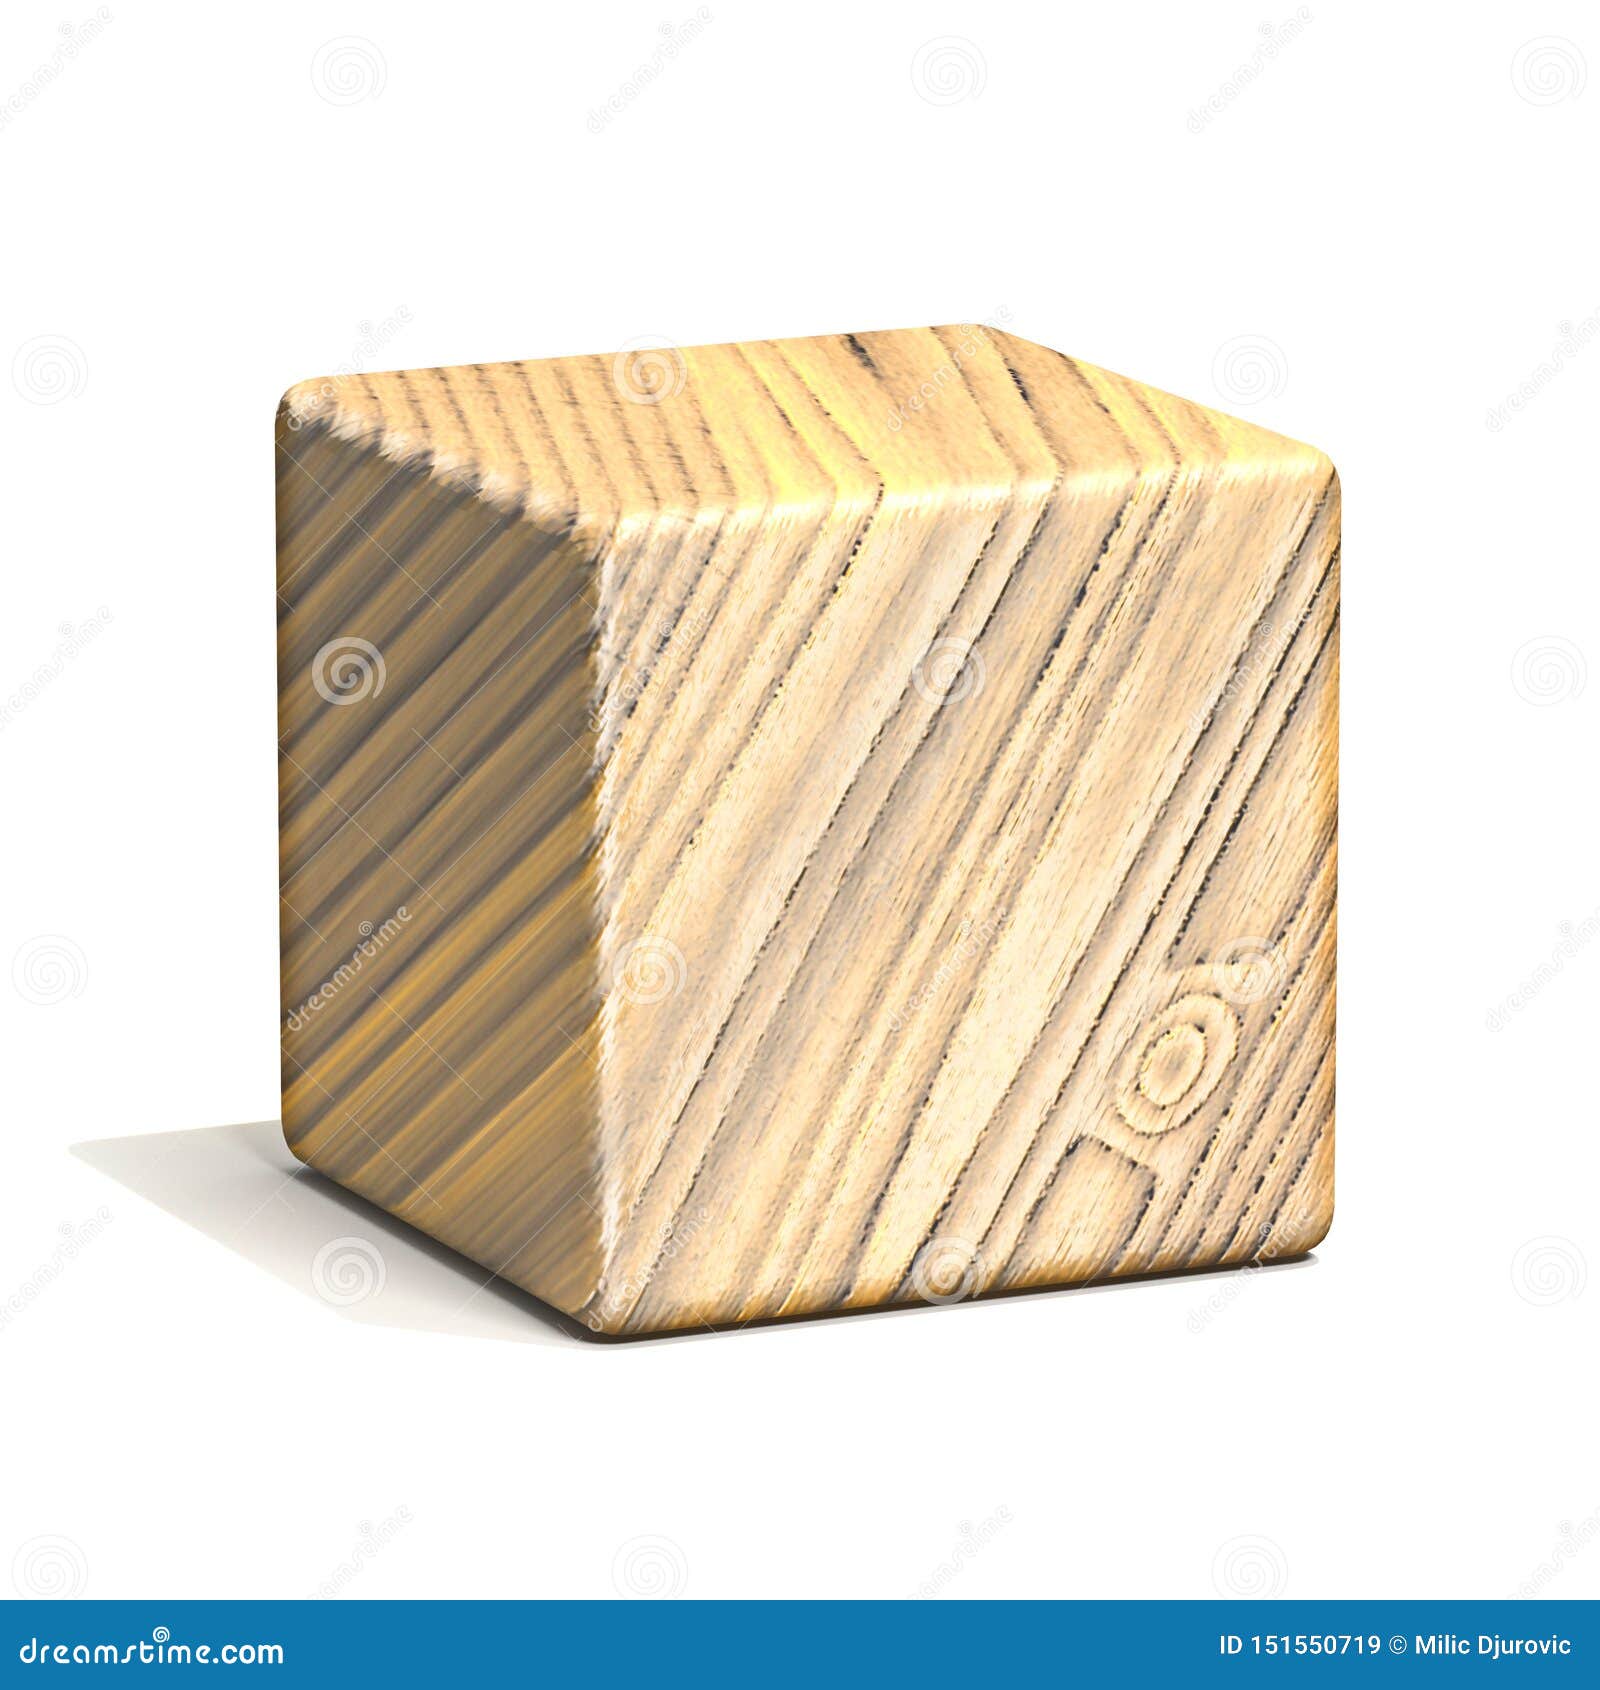 560,089 Wooden Cube Images, Stock Photos, 3D objects, & Vectors